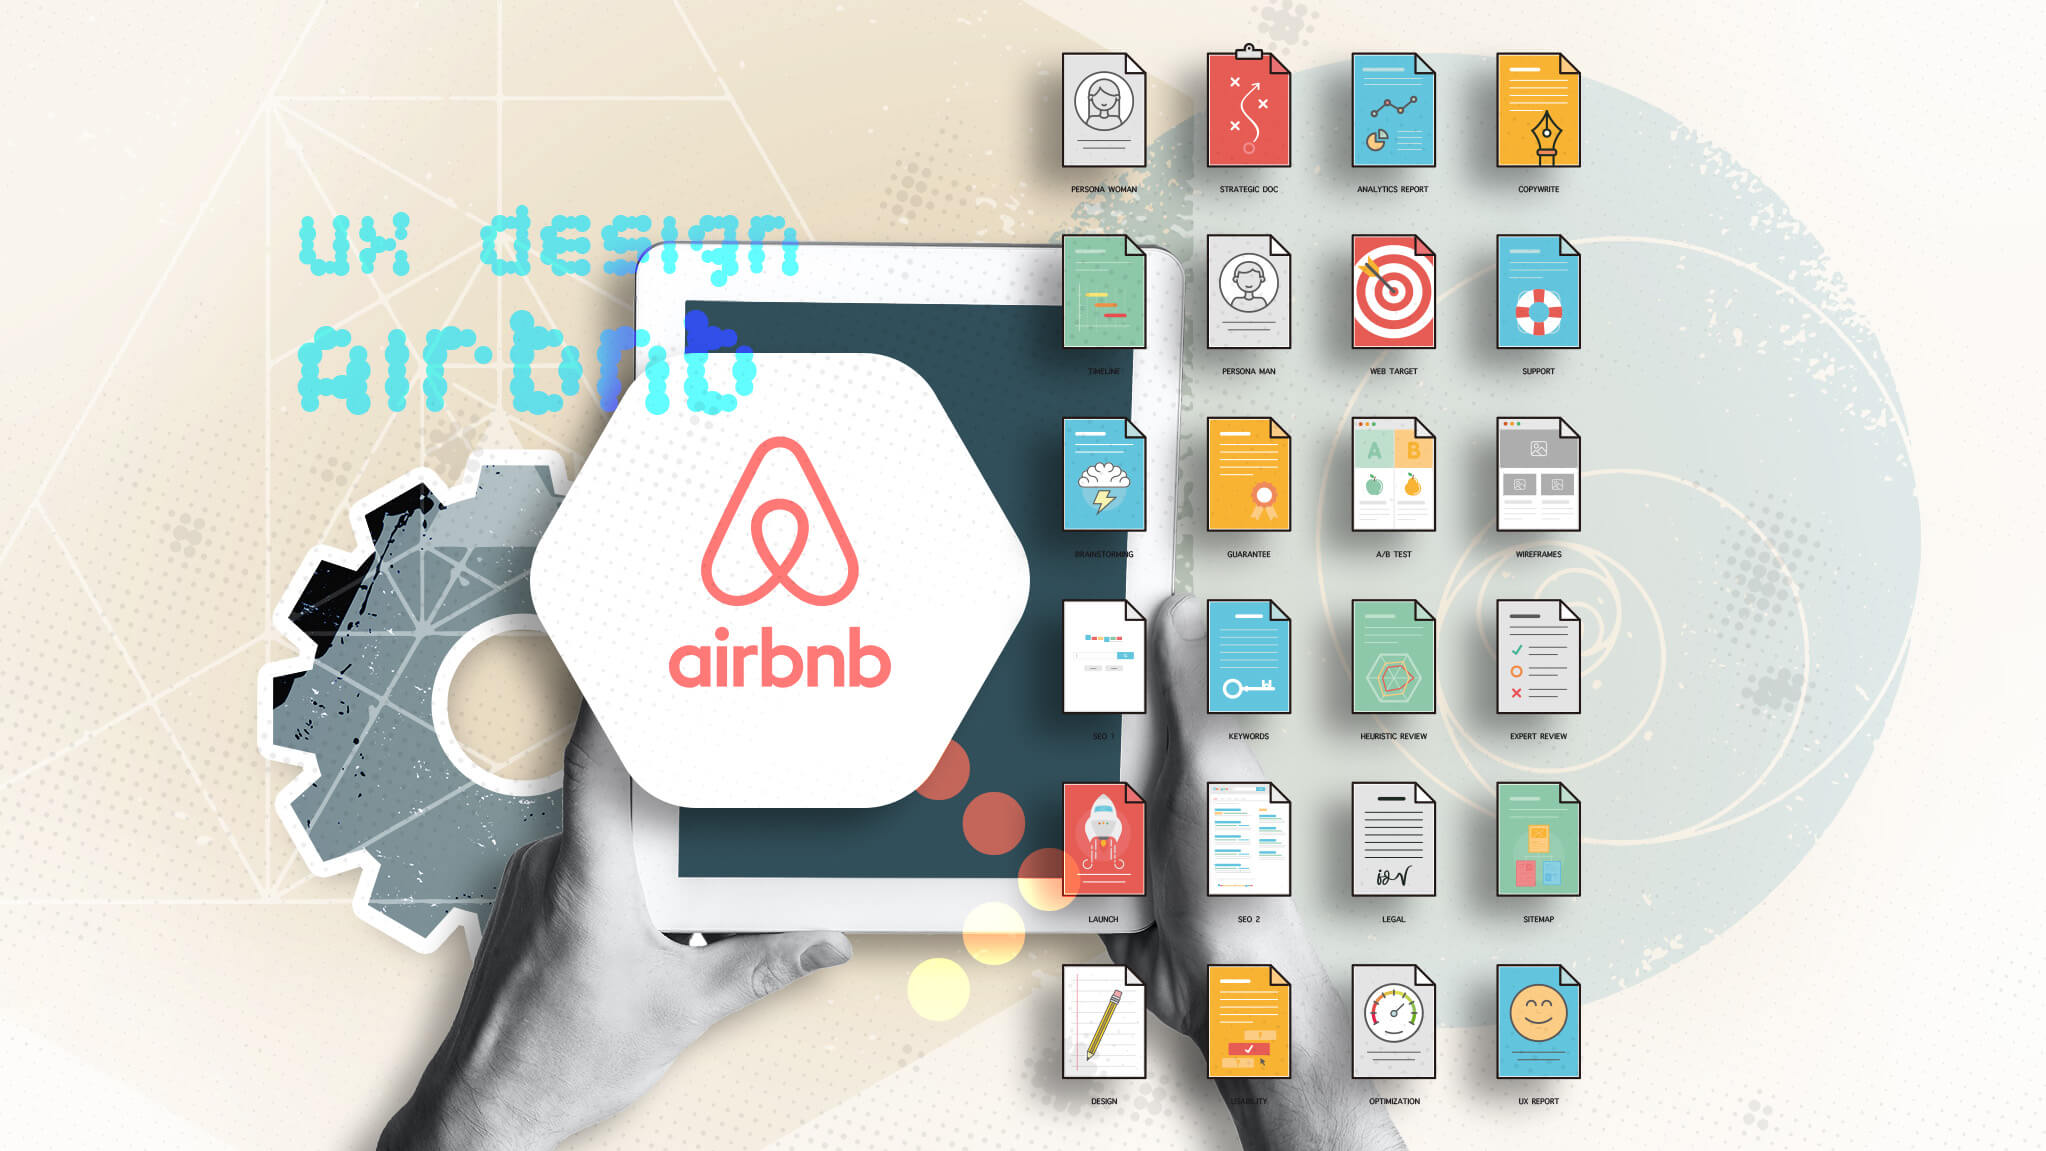 “Airbnb logo, a stylized ‘Belo’ symbol in the shape of a heart”